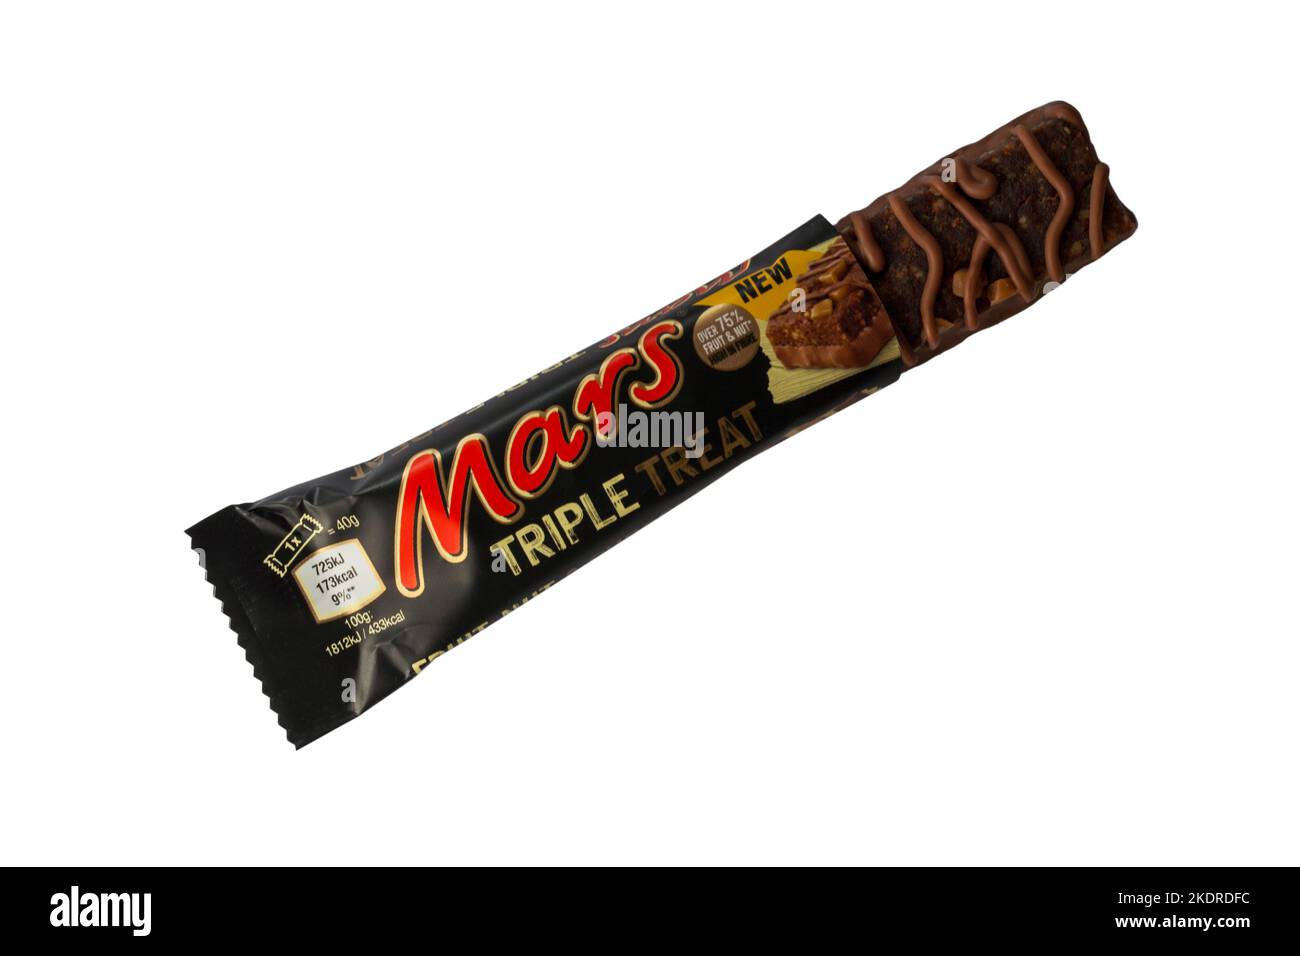 Bar of new Mars Triple Treat chocolate bar fruit, nut & chocolate opened to show contents isolated on white background Stock Photo